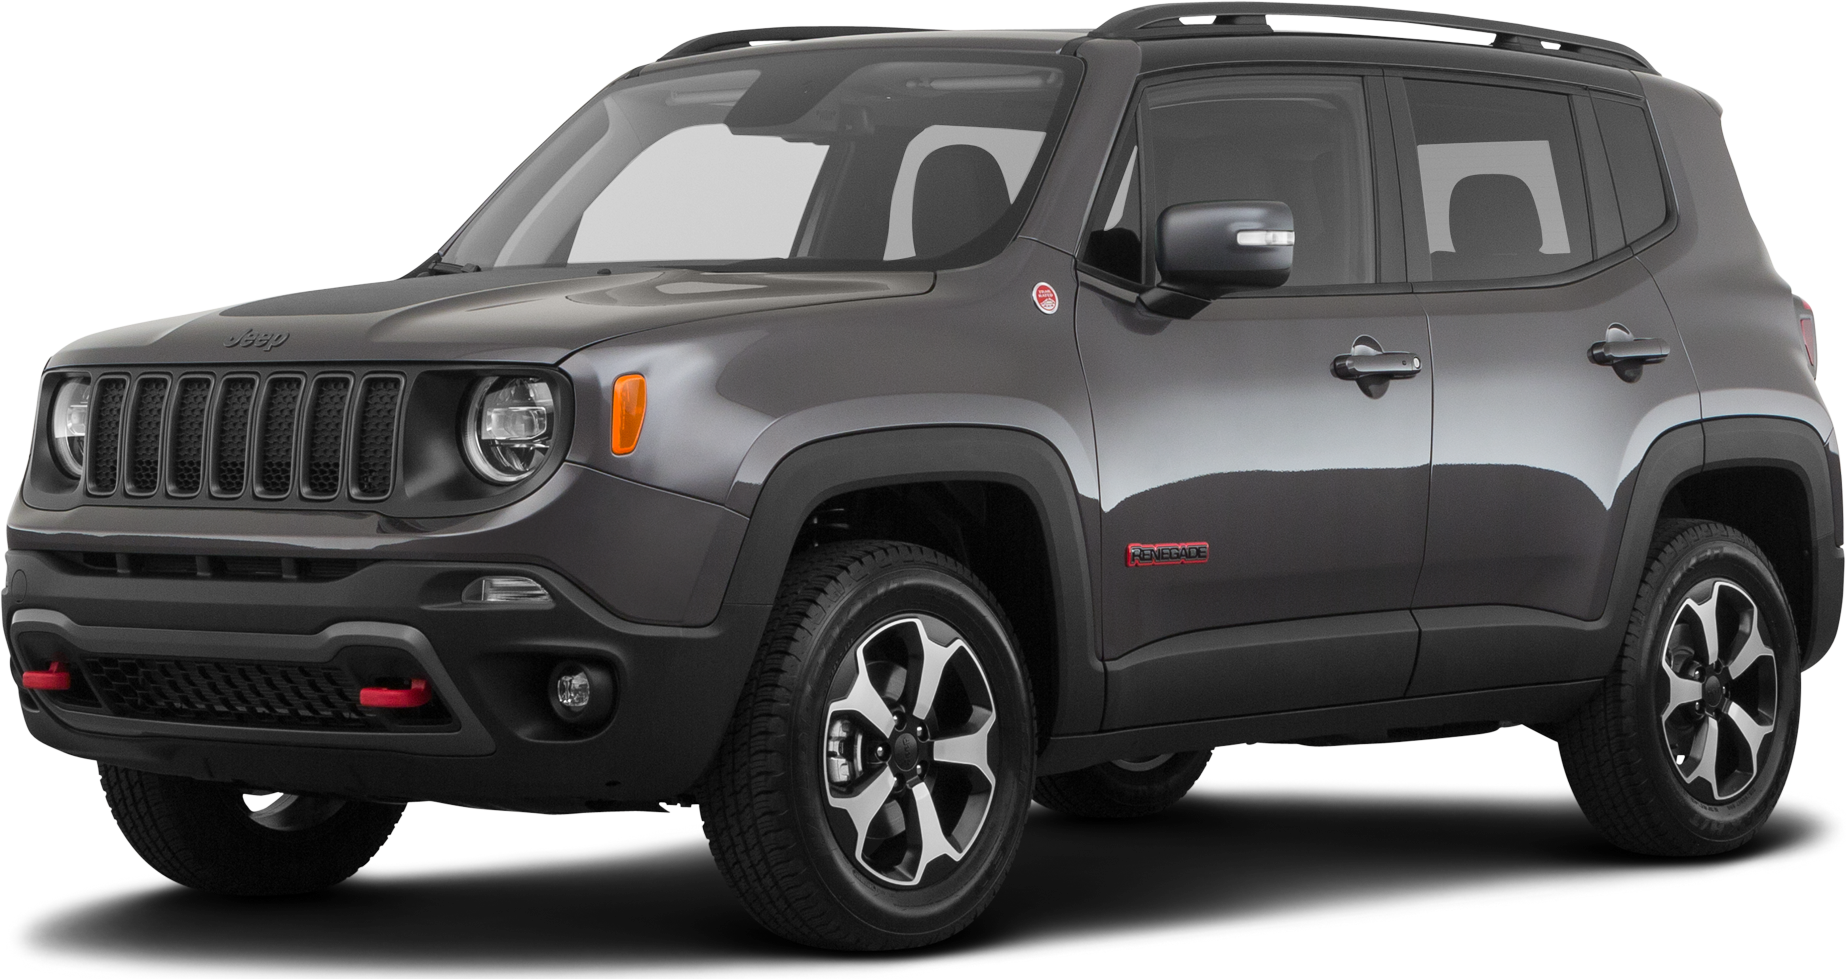 19 Jeep Renegade Price Kbb Value Cars For Sale Kelley Blue Book